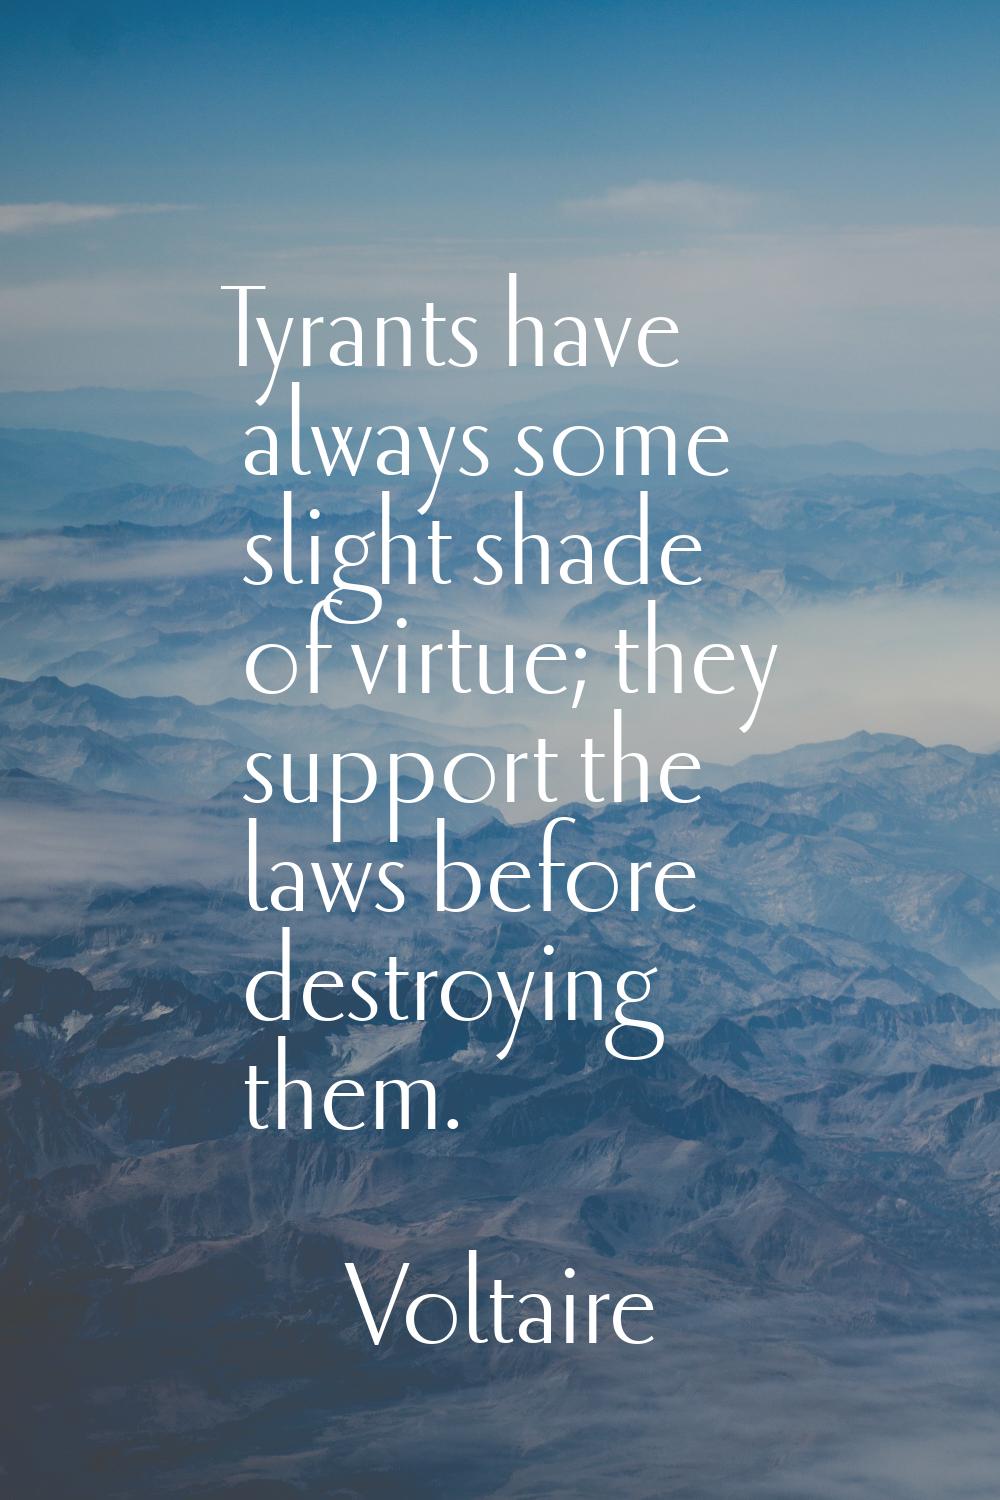 Tyrants have always some slight shade of virtue; they support the laws before destroying them.